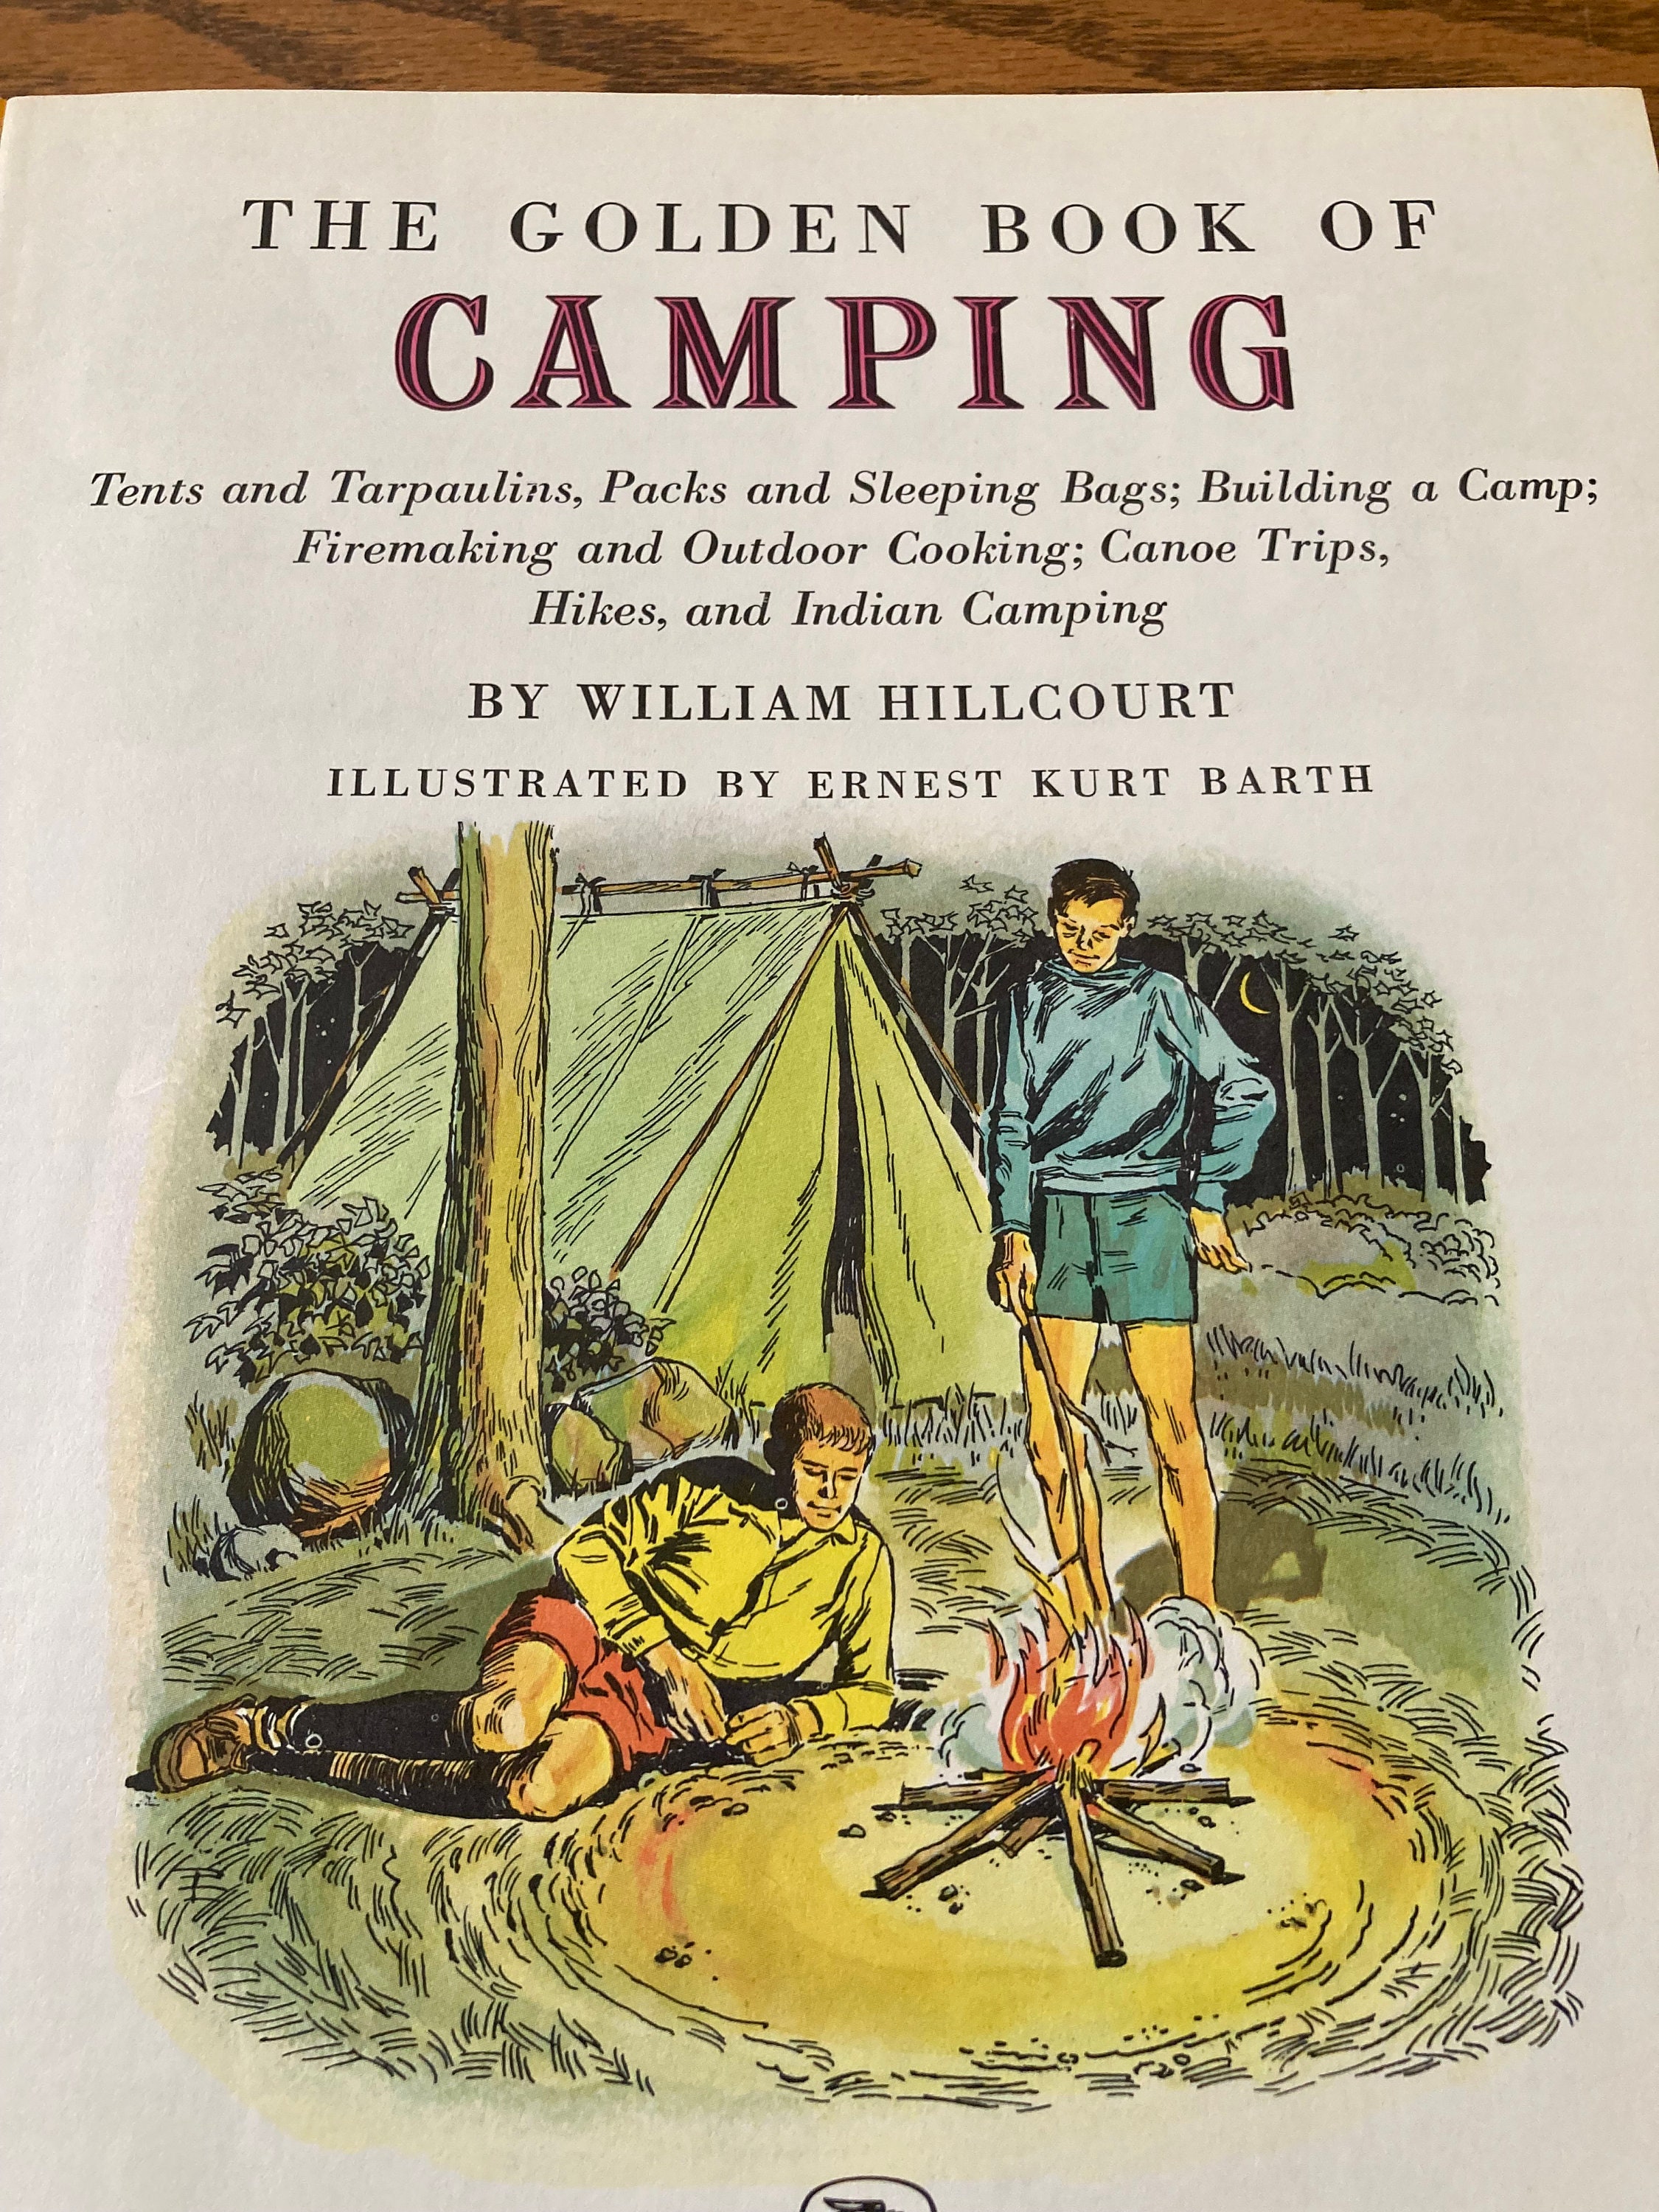 Classic 1971 Outdoors Book for Wilderness Camping, the Golden Book of  Camping by William Hillcourt, Rare & Glorious Hardcover, Iconic Art 